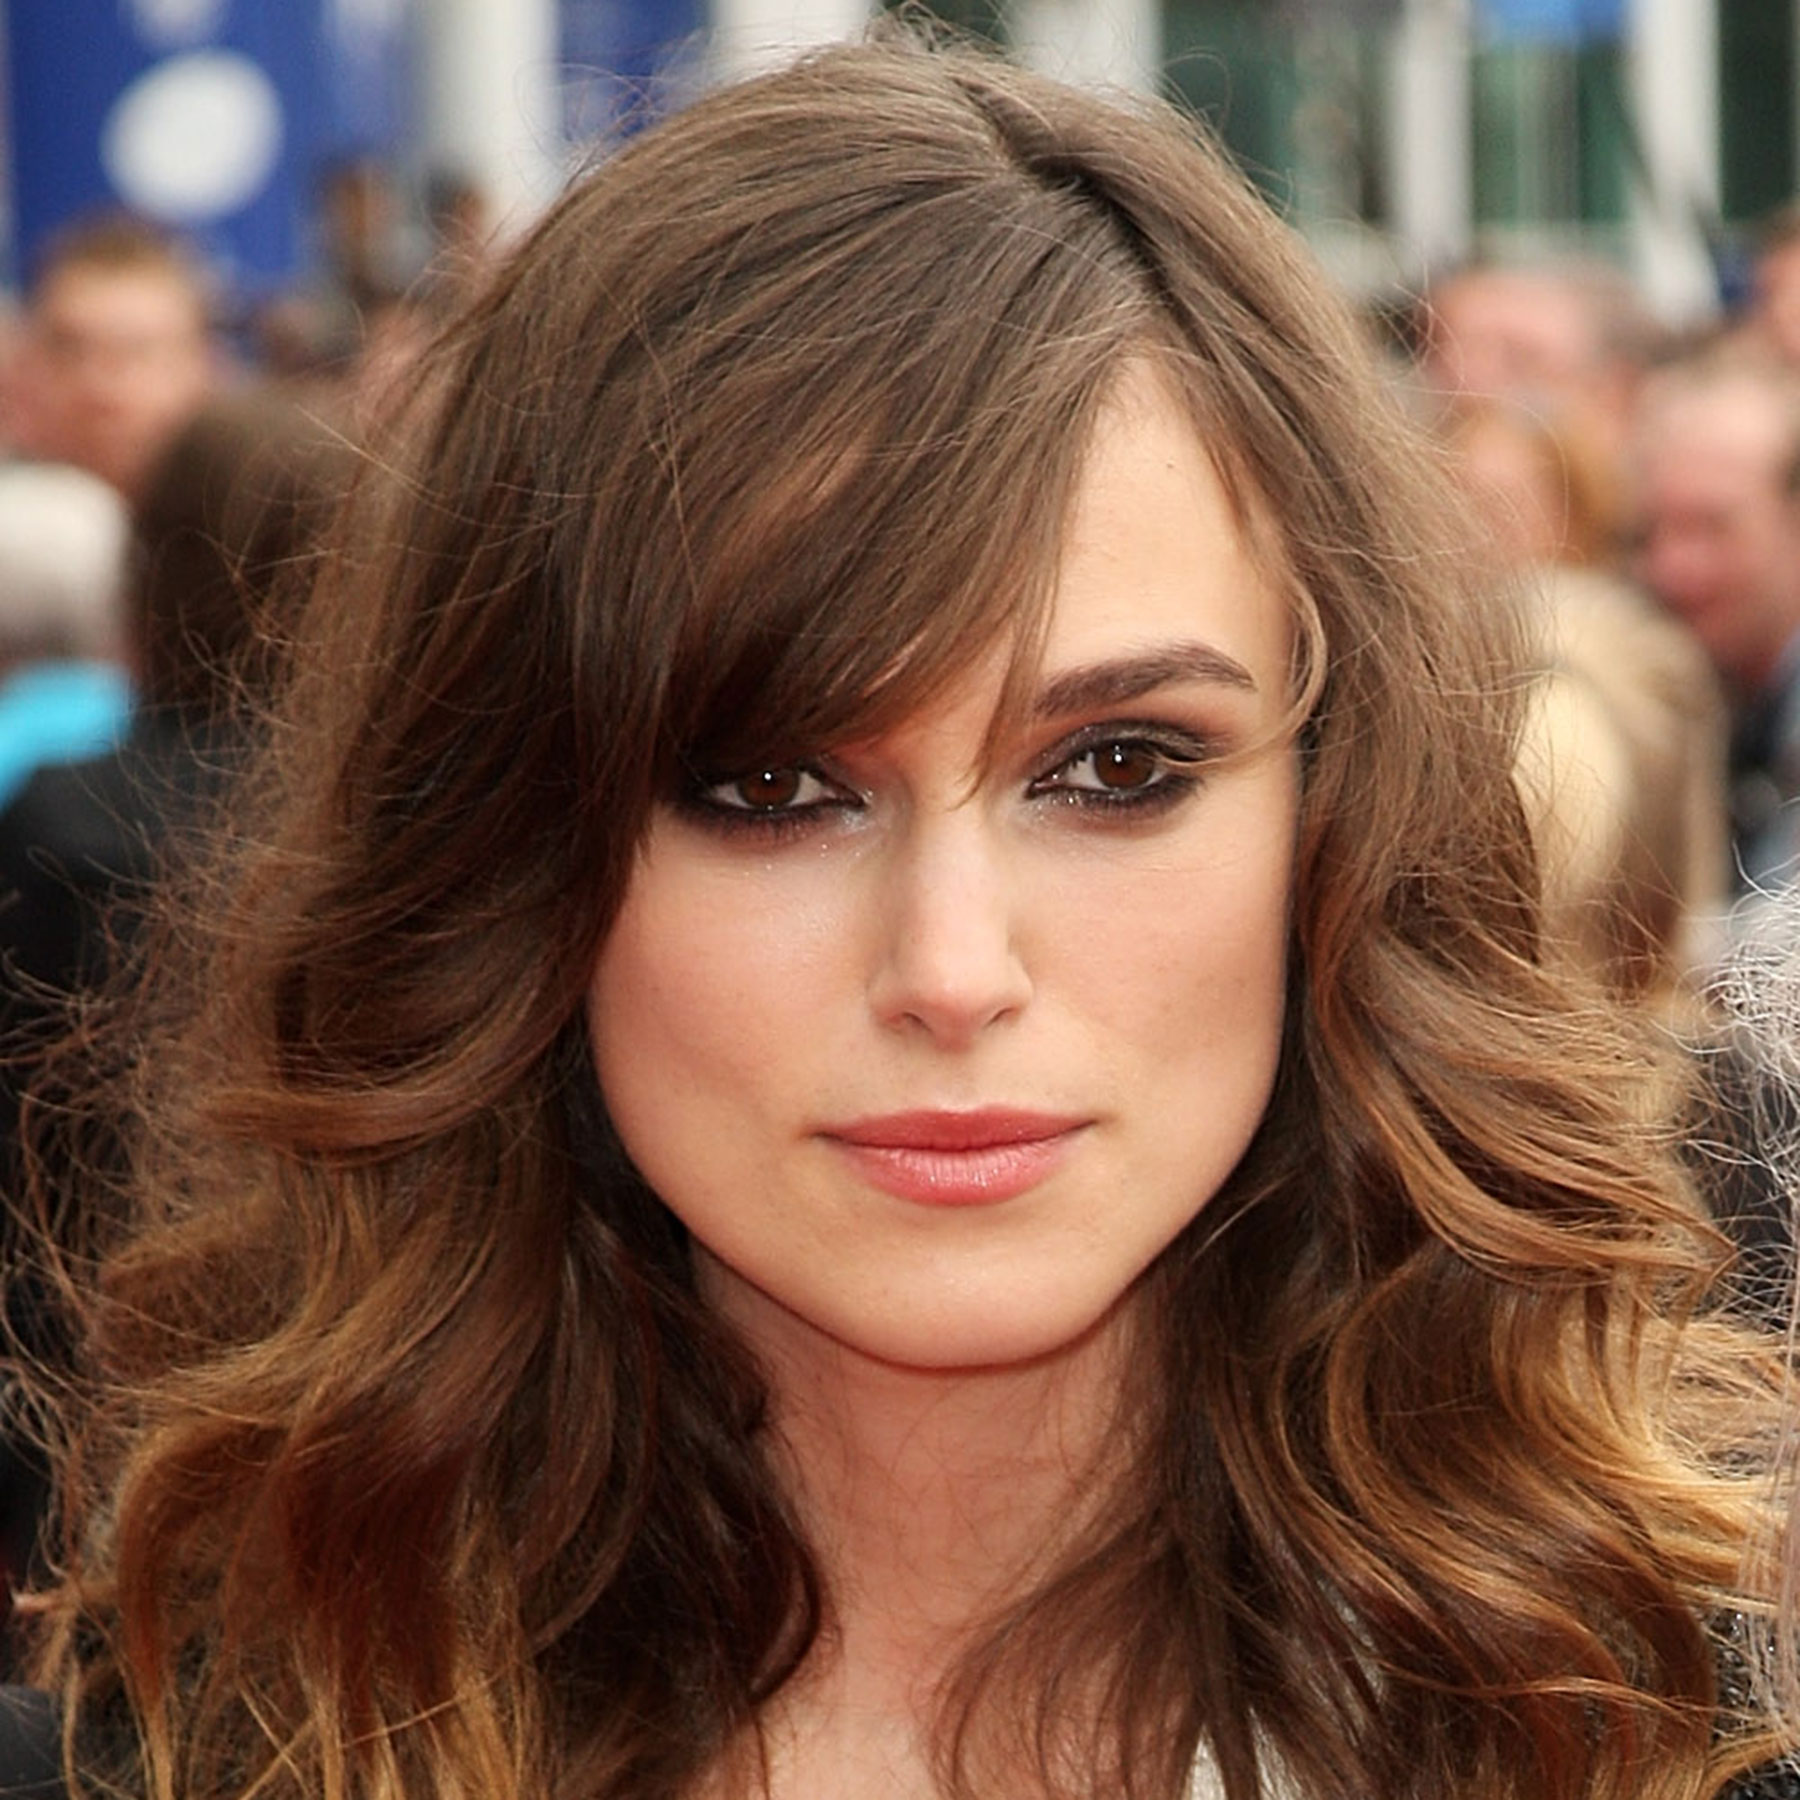 Long Wavy Hair with Center Parted SideSwept Bangs  by Hairstyleology   Medium